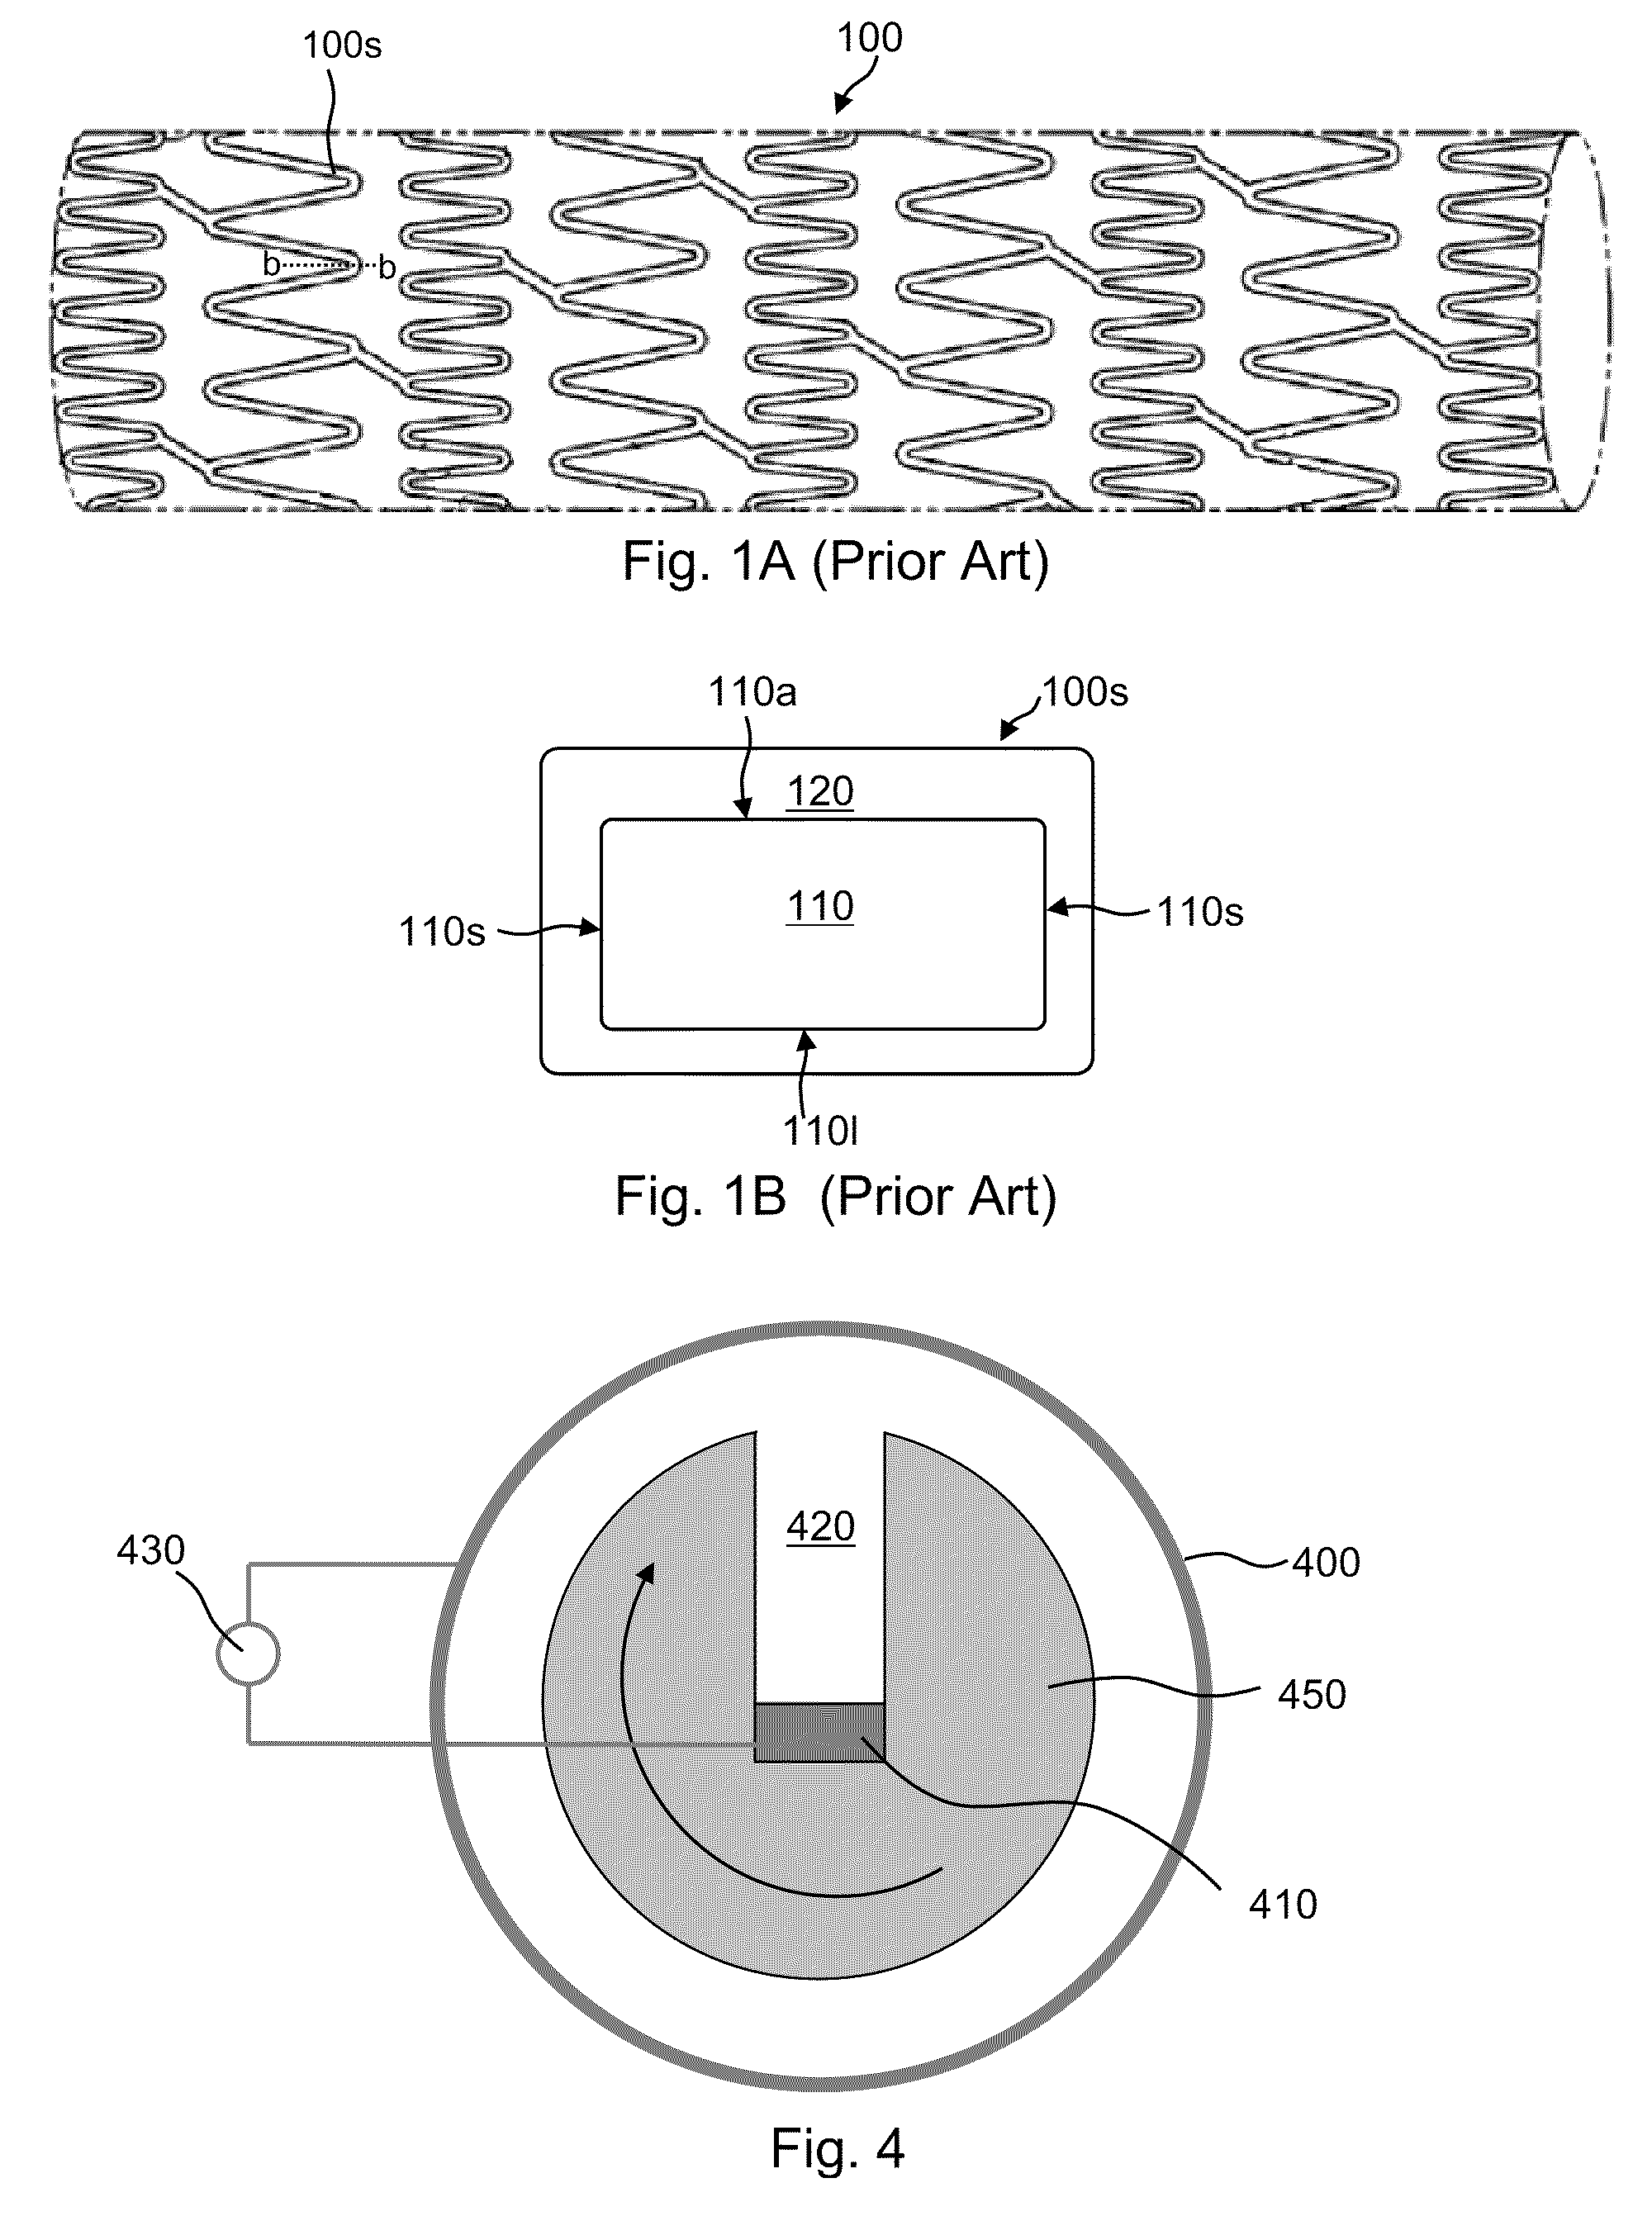 Medical devices having electrodeposited conductive polymer coatings